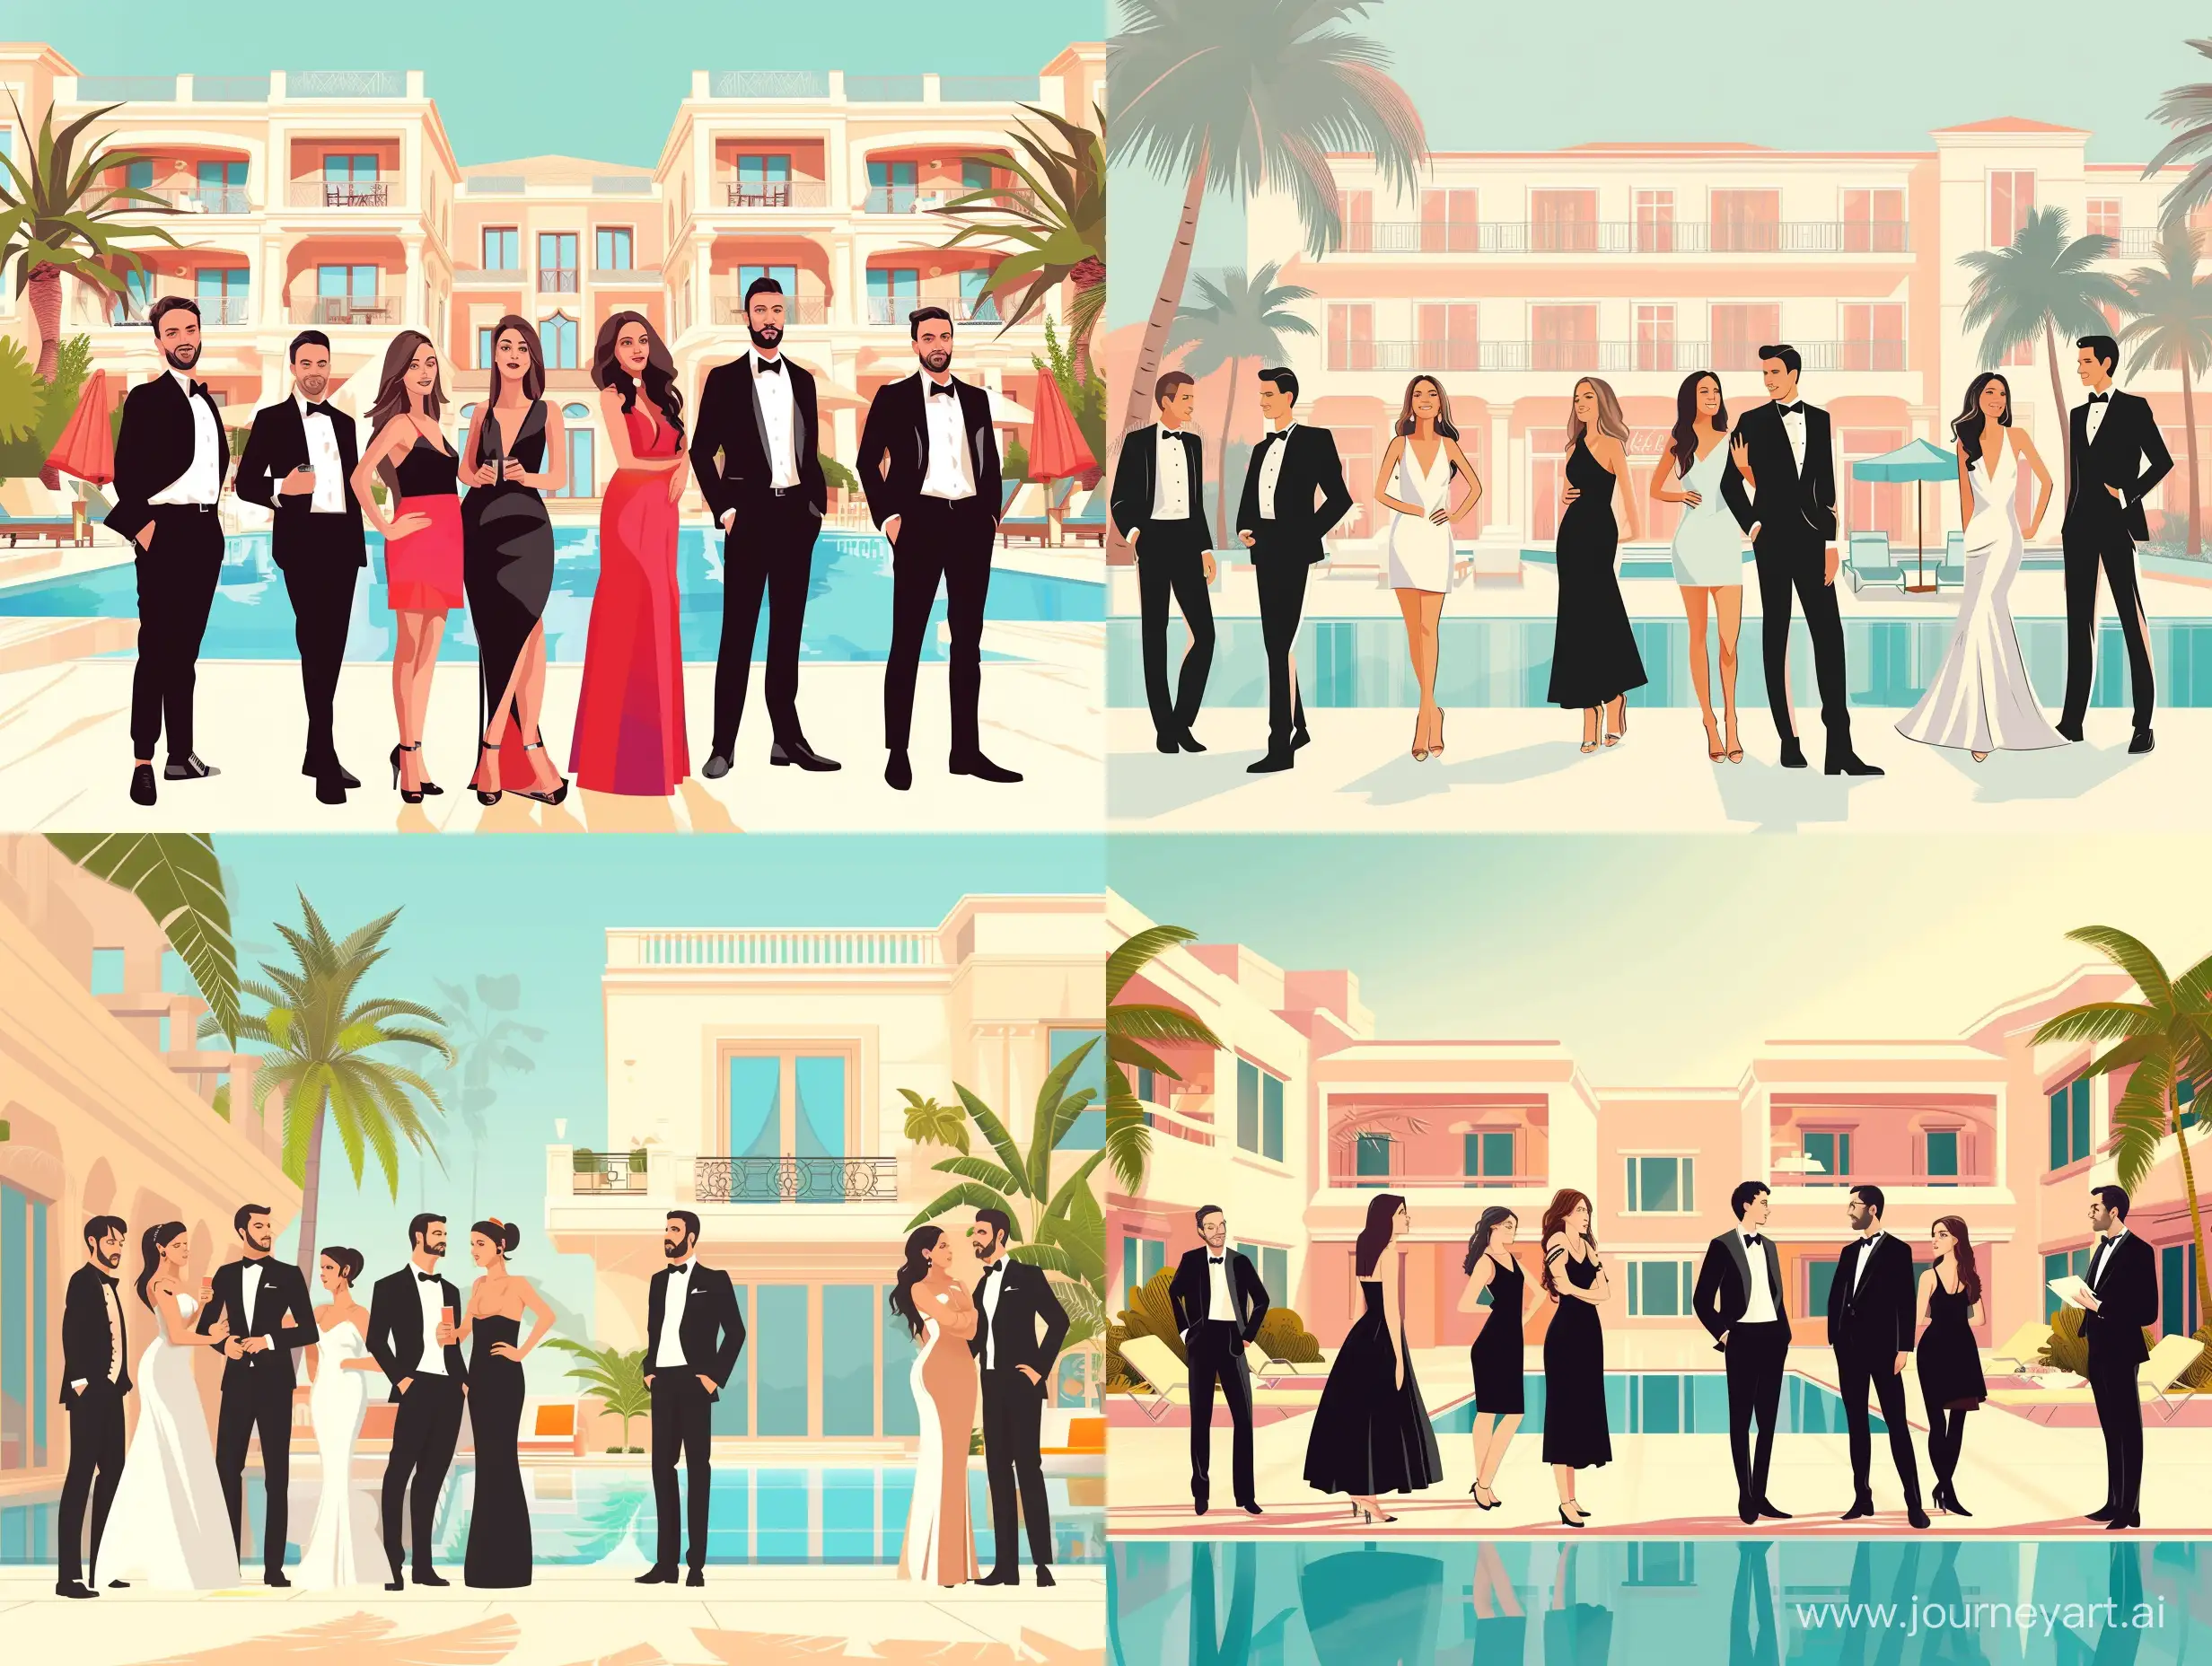 Elegant-Reception-Team-in-Formal-Attire-at-Luxurious-Turkish-Hotel-with-Pool-and-Palm-Trees